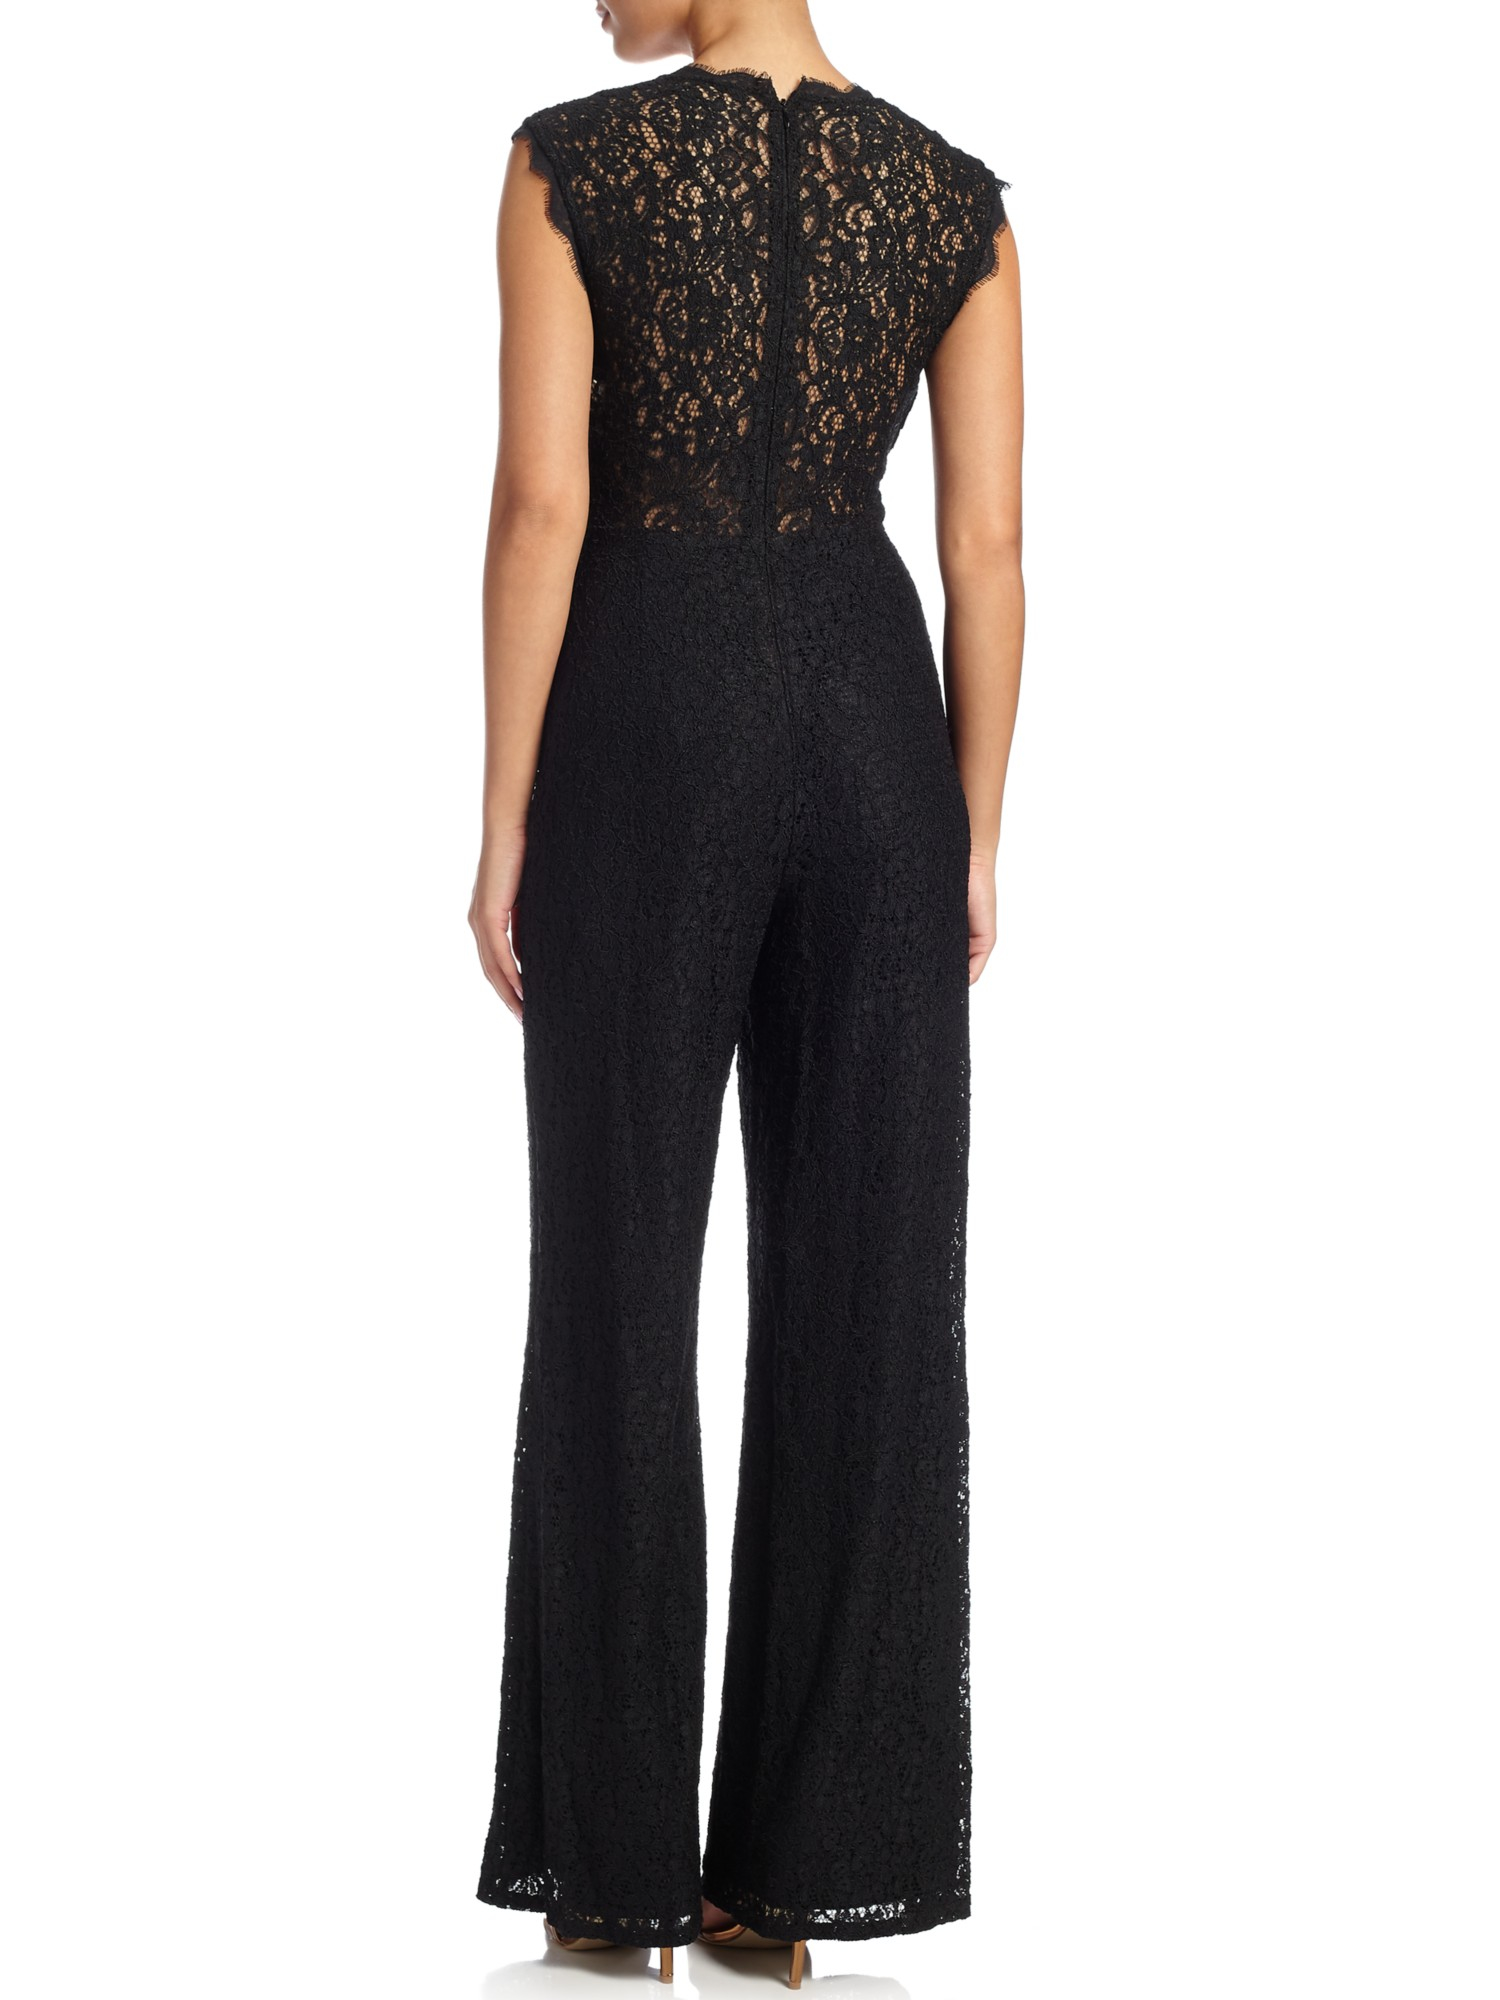 adrianna papell lace jumpsuit